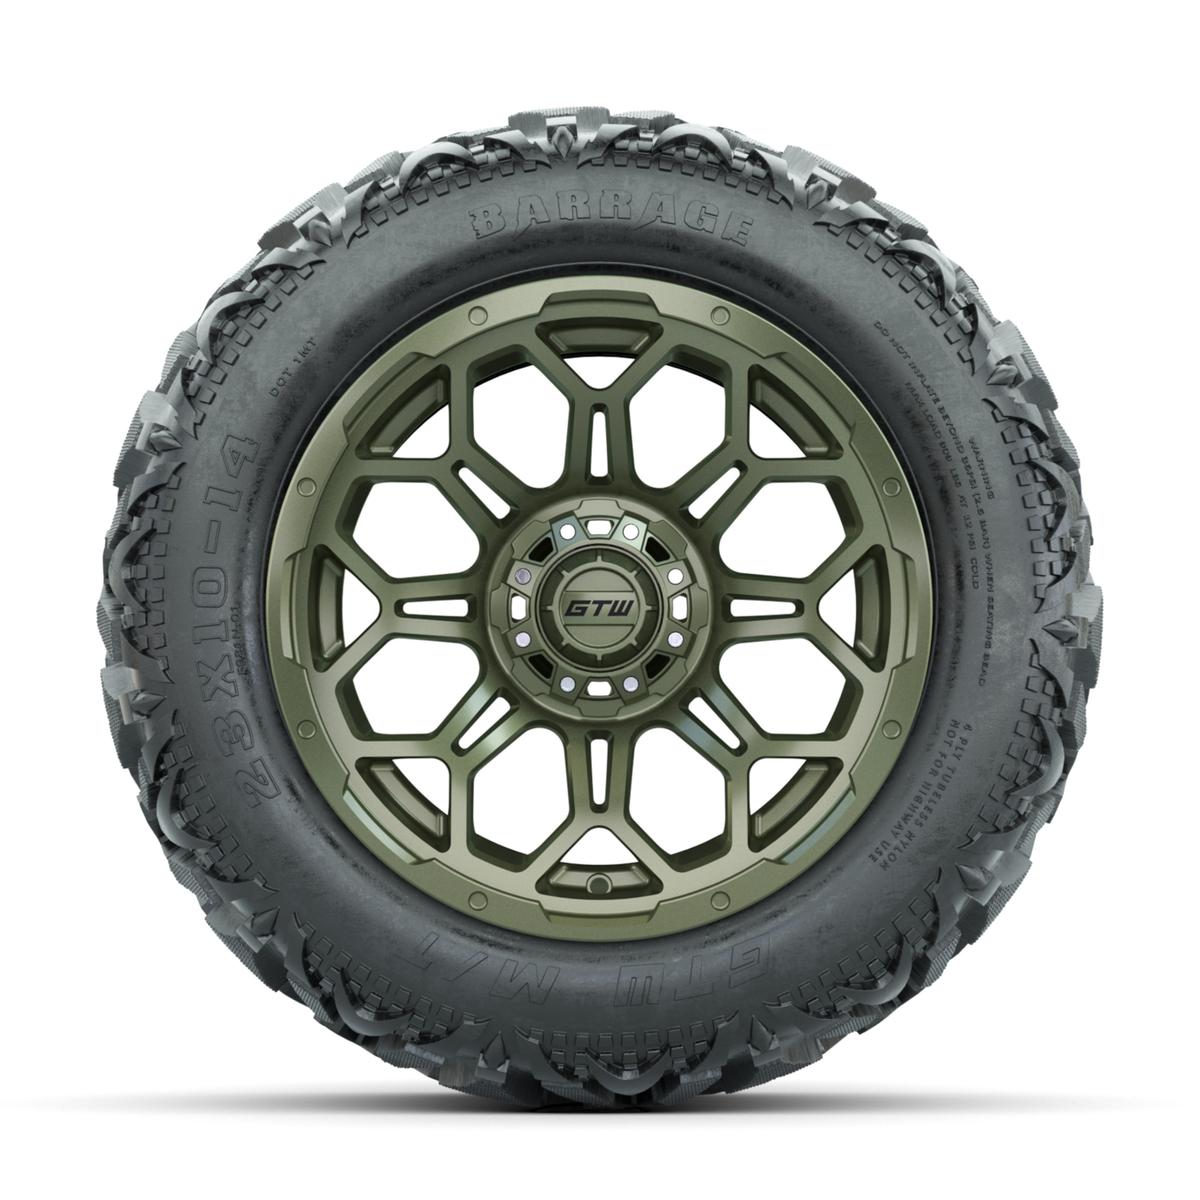 14” GTW Bravo Matte Recon Green Wheels with 23” Barrage Mud Tires – Set of 4